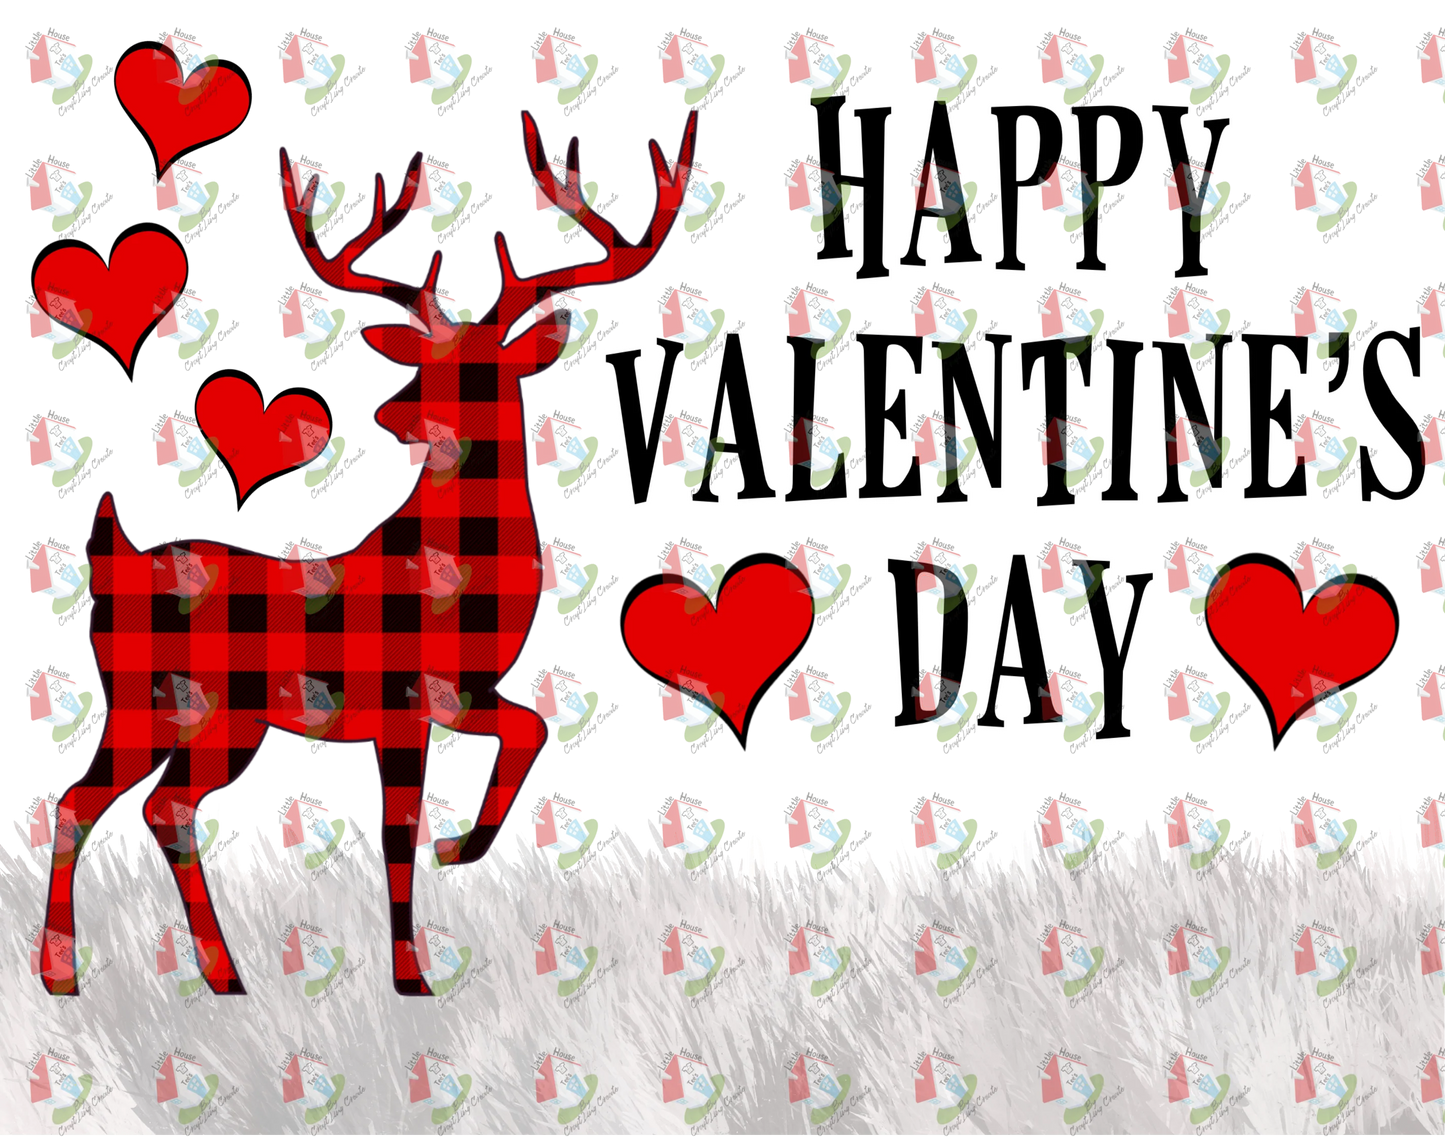 7402 Happy ValentineÕs Day deer puzzle frame.png